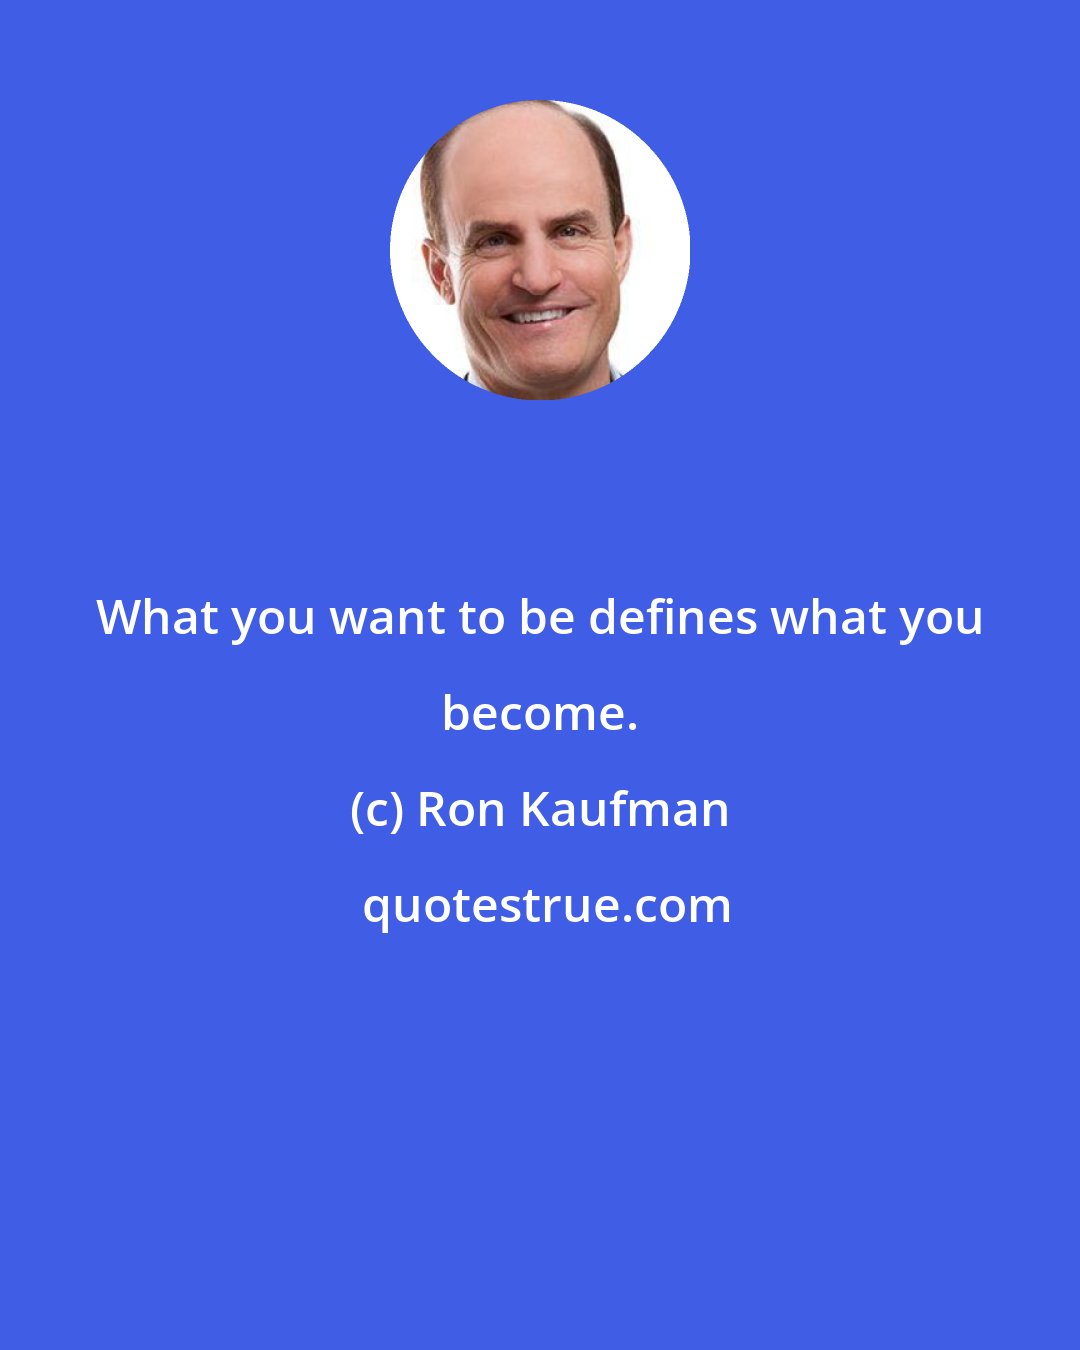 Ron Kaufman: What you want to be defines what you become.